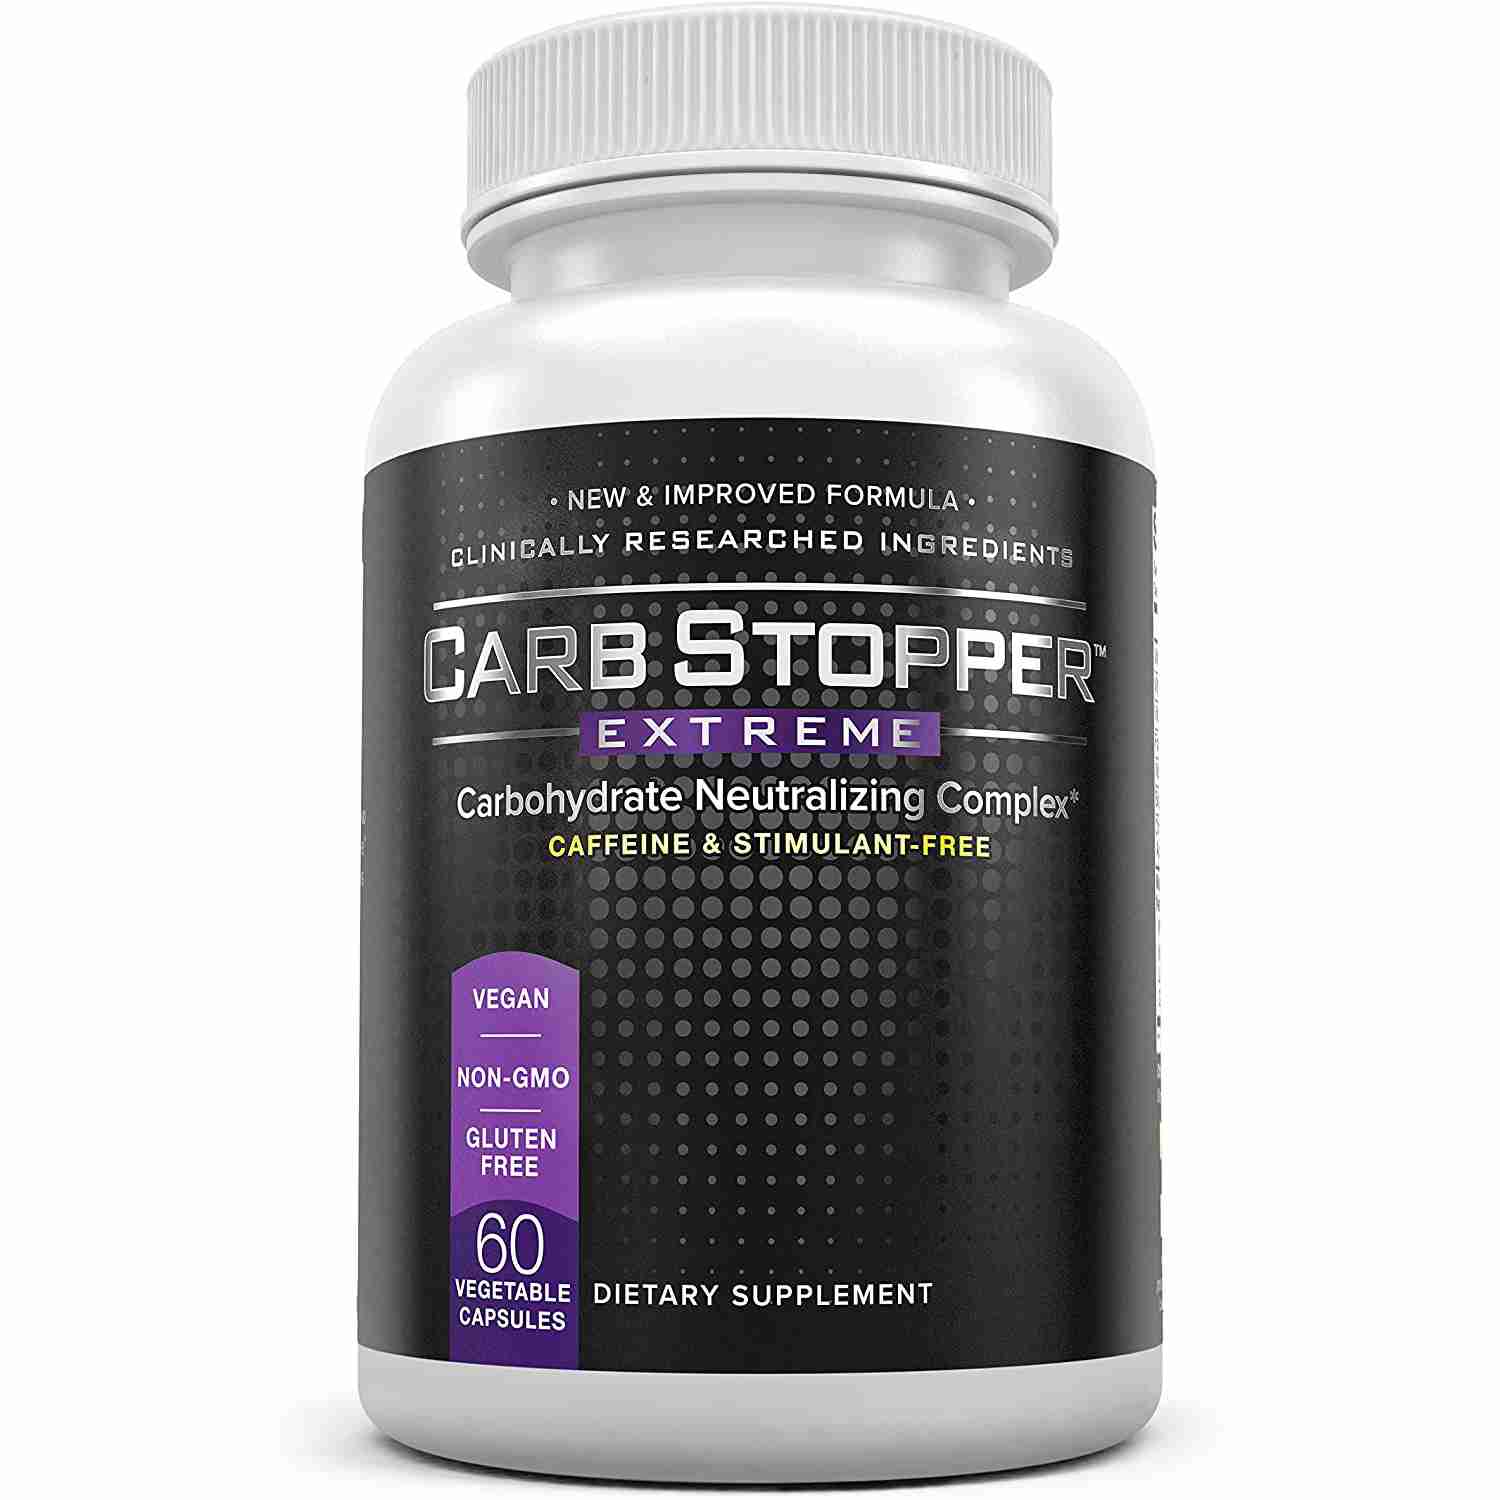 supplements with cash back rebate